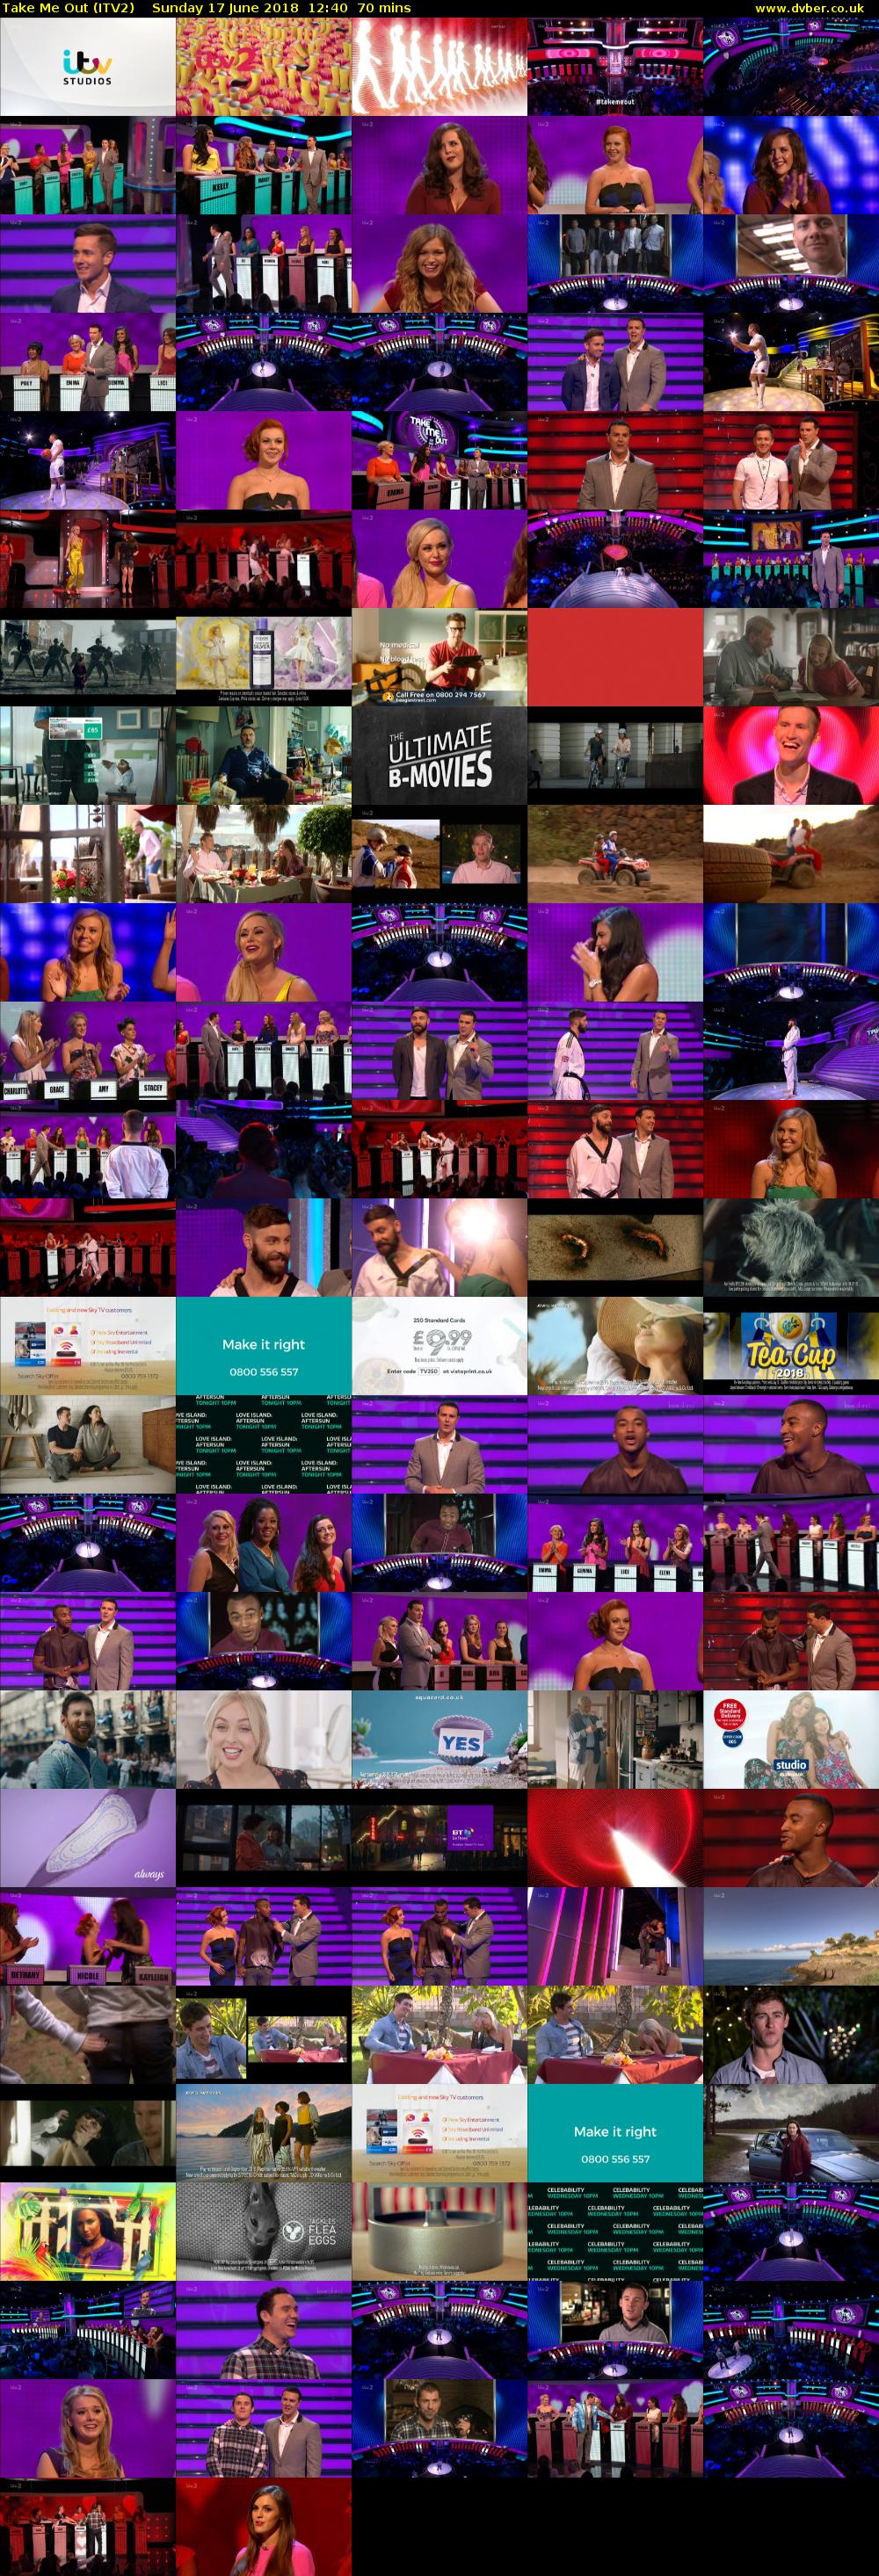 Take Me Out (ITV2) Sunday 17 June 2018 12:40 - 13:50